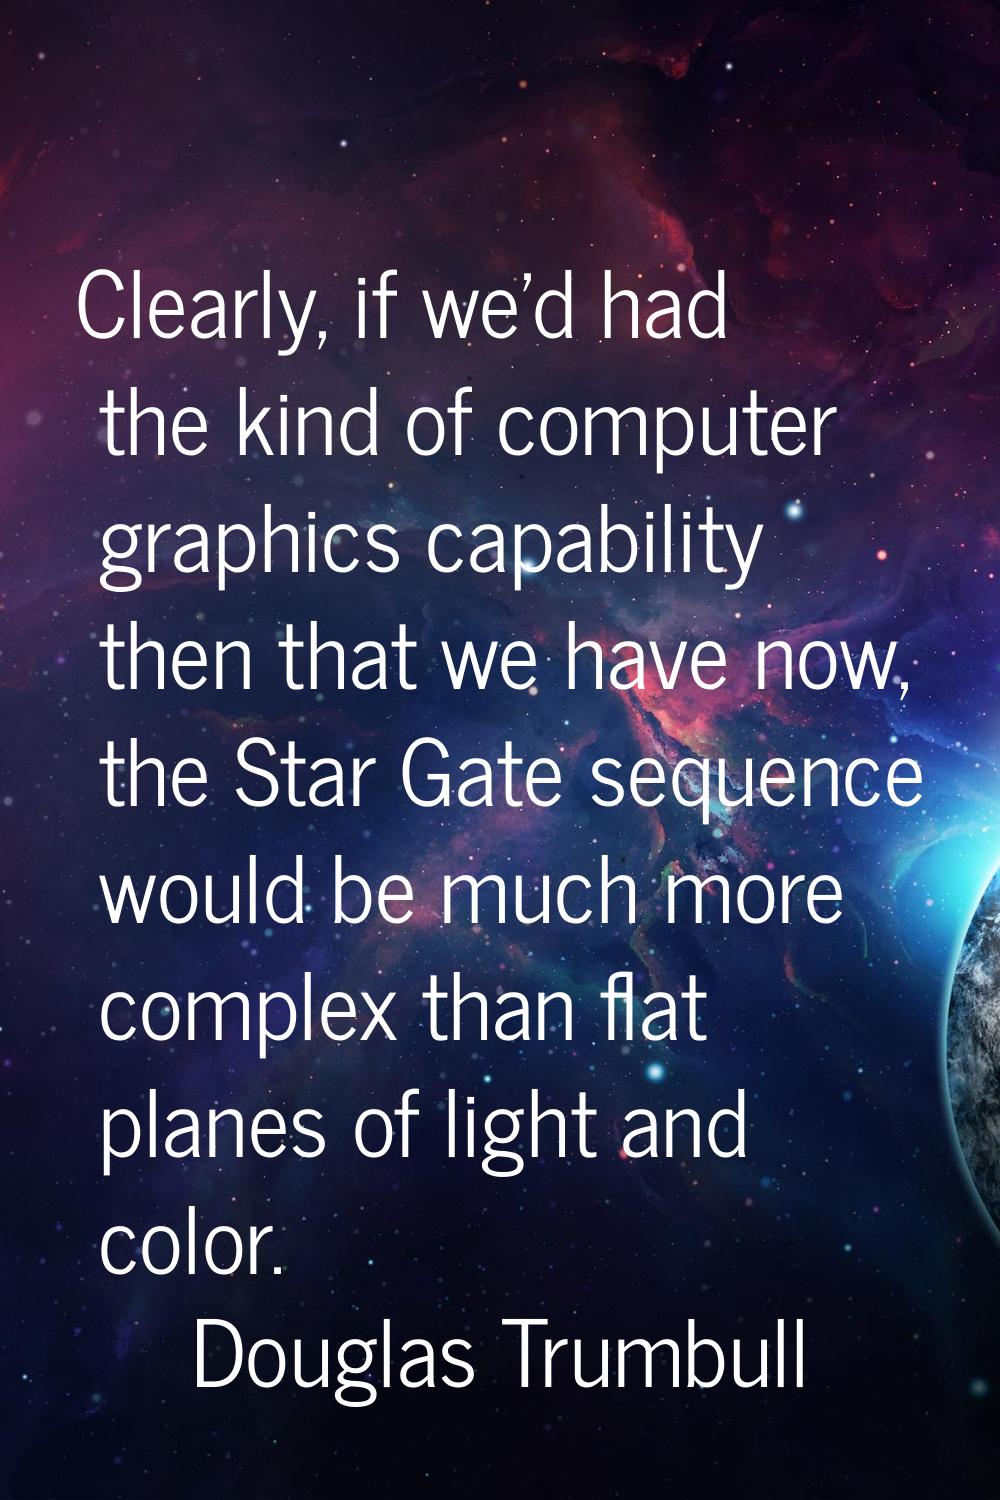 Clearly, if we'd had the kind of computer graphics capability then that we have now, the Star Gate 